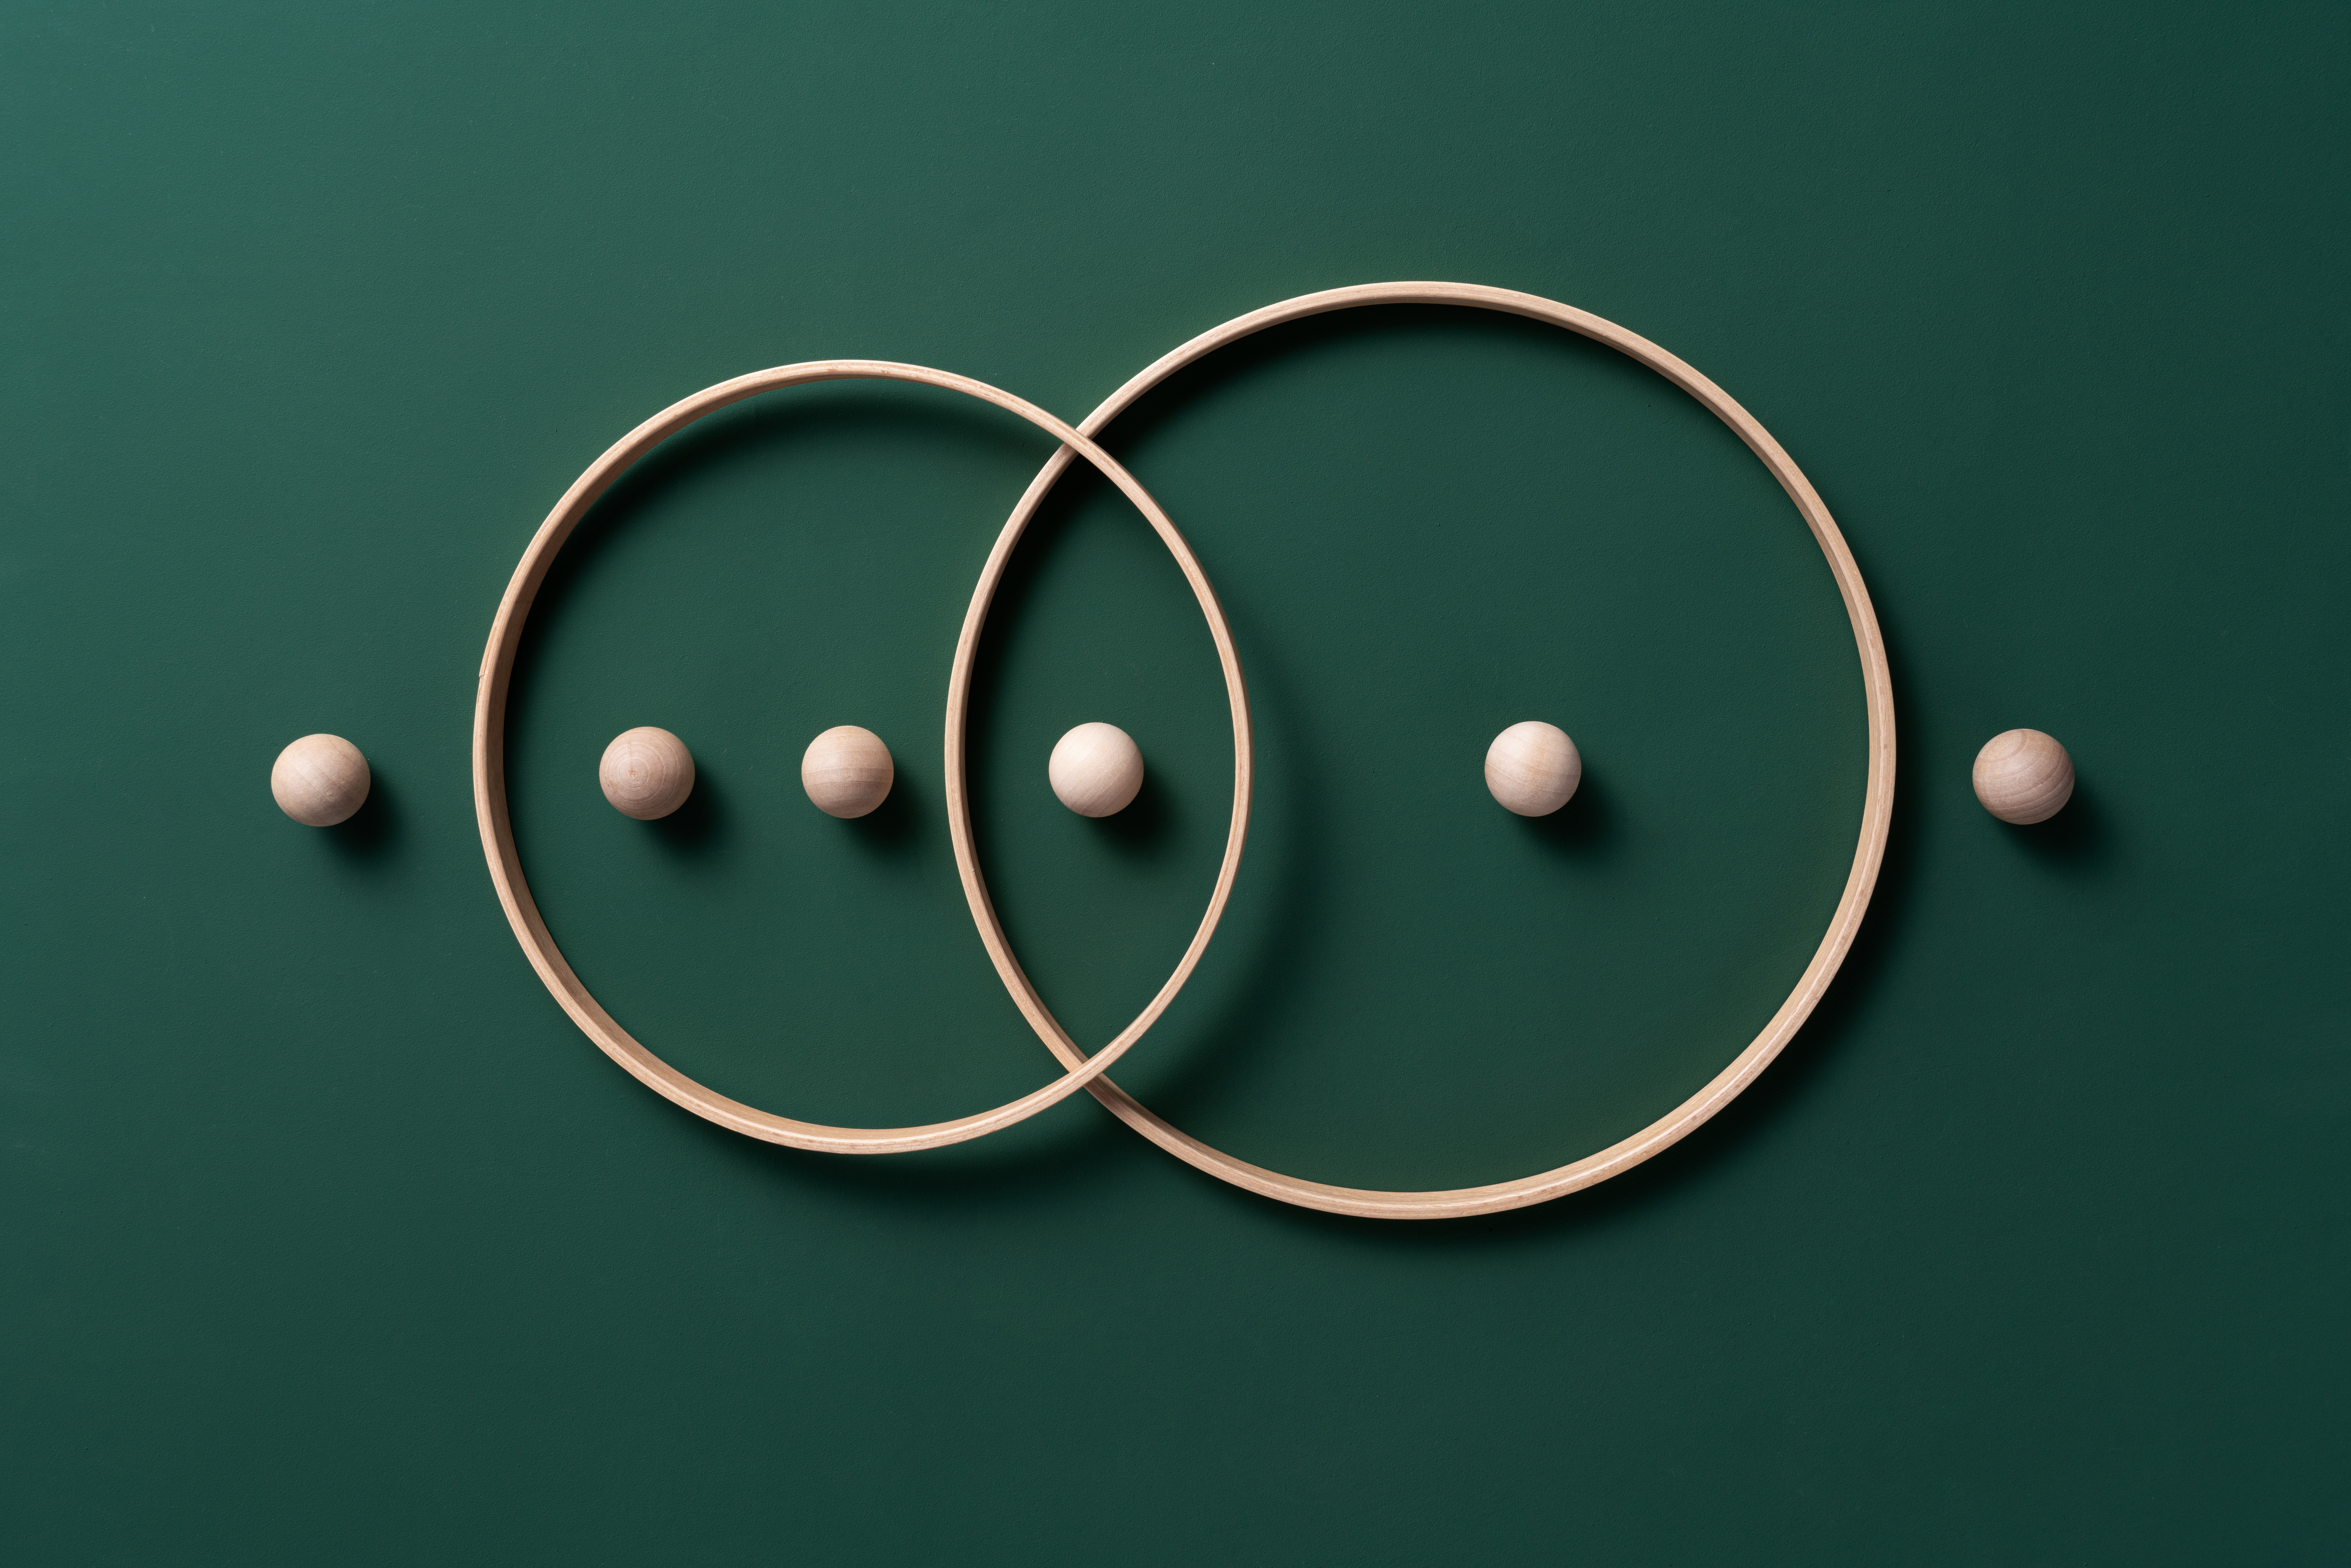 Image of crossing rings with spheres on a green background.